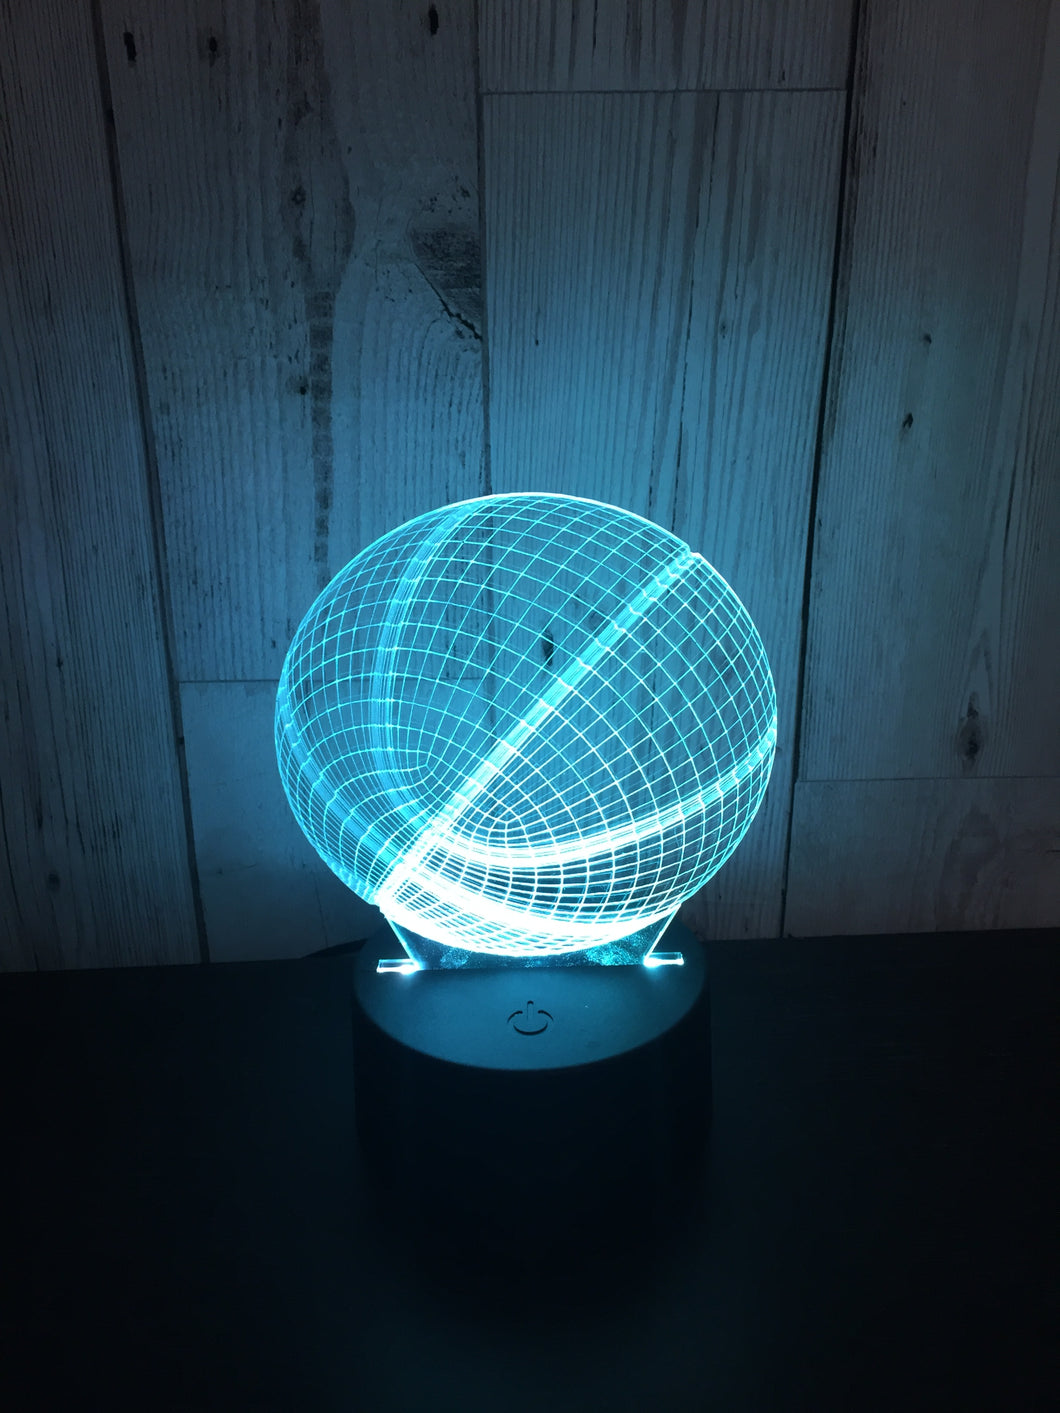 LED light up Football ball display- 9 colour options with remote! - Laser LLama Designs Ltd